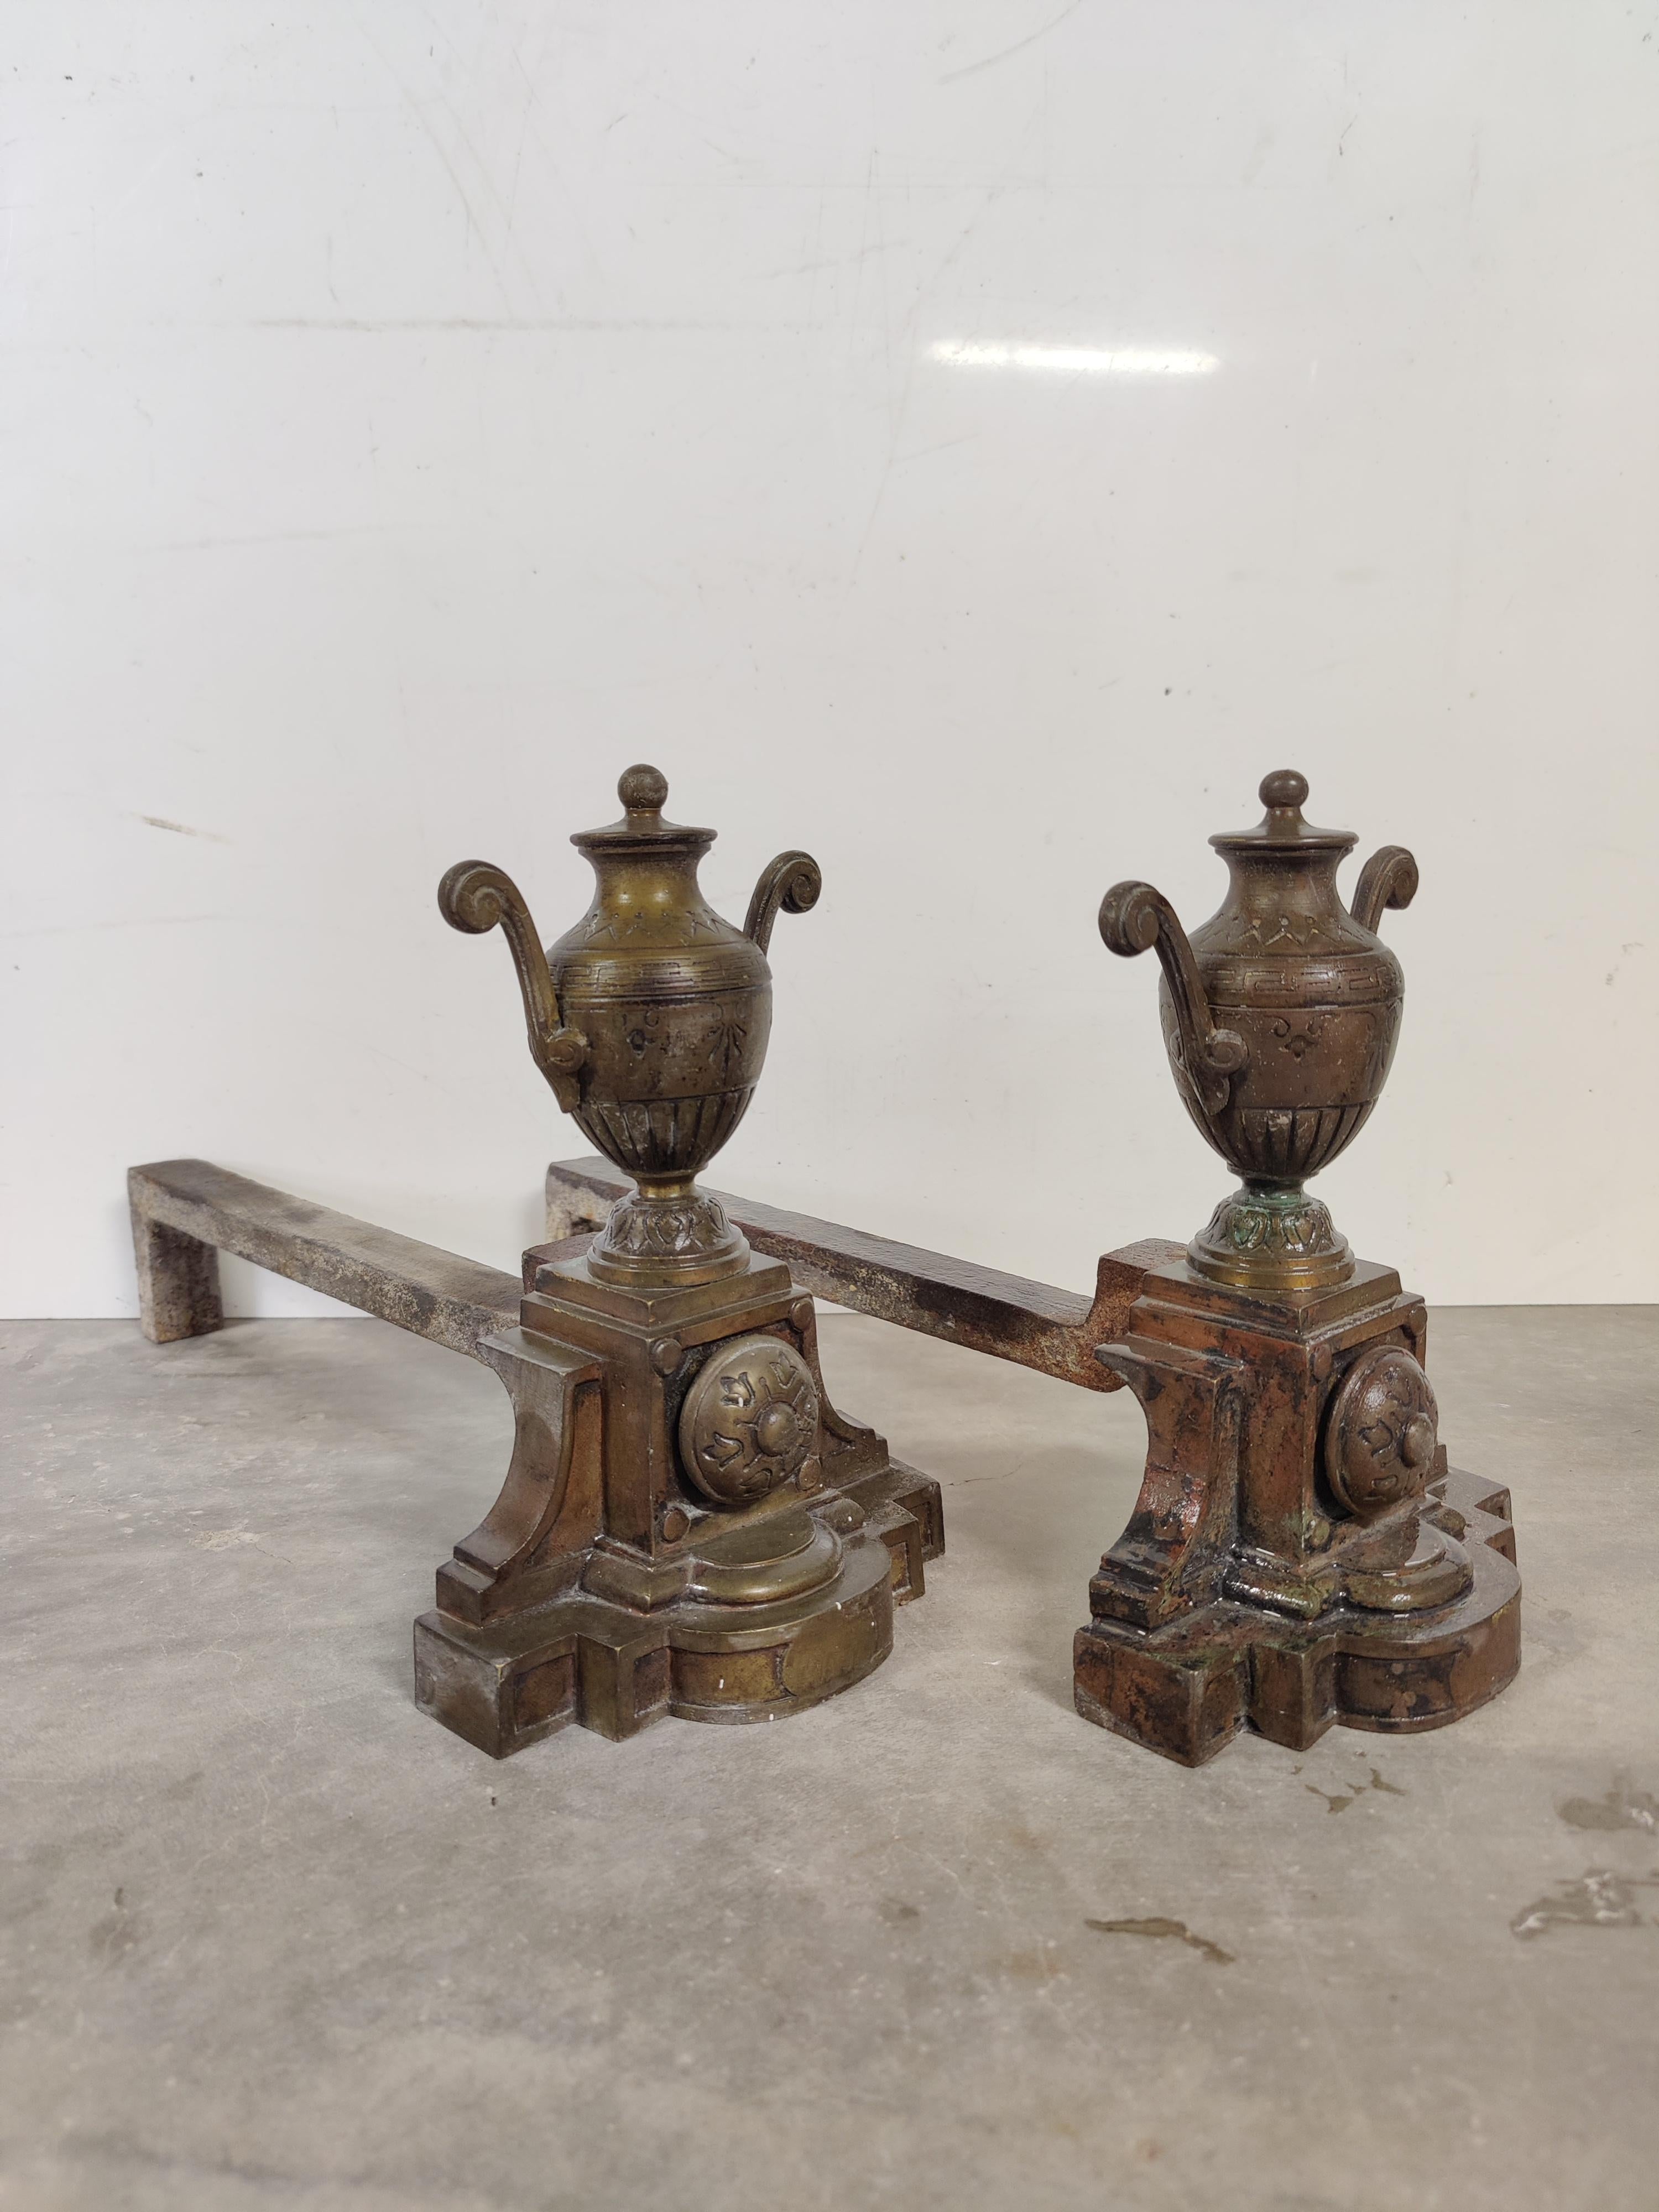 Beautiful decorative andirons.

Weight: 12 lbs / 5 kg.

Upon request they can be made black / pewter.

See all our antique fireplaces and fireplace accessories at 1stdibs by pressing the ‘View All From Seller’ button.